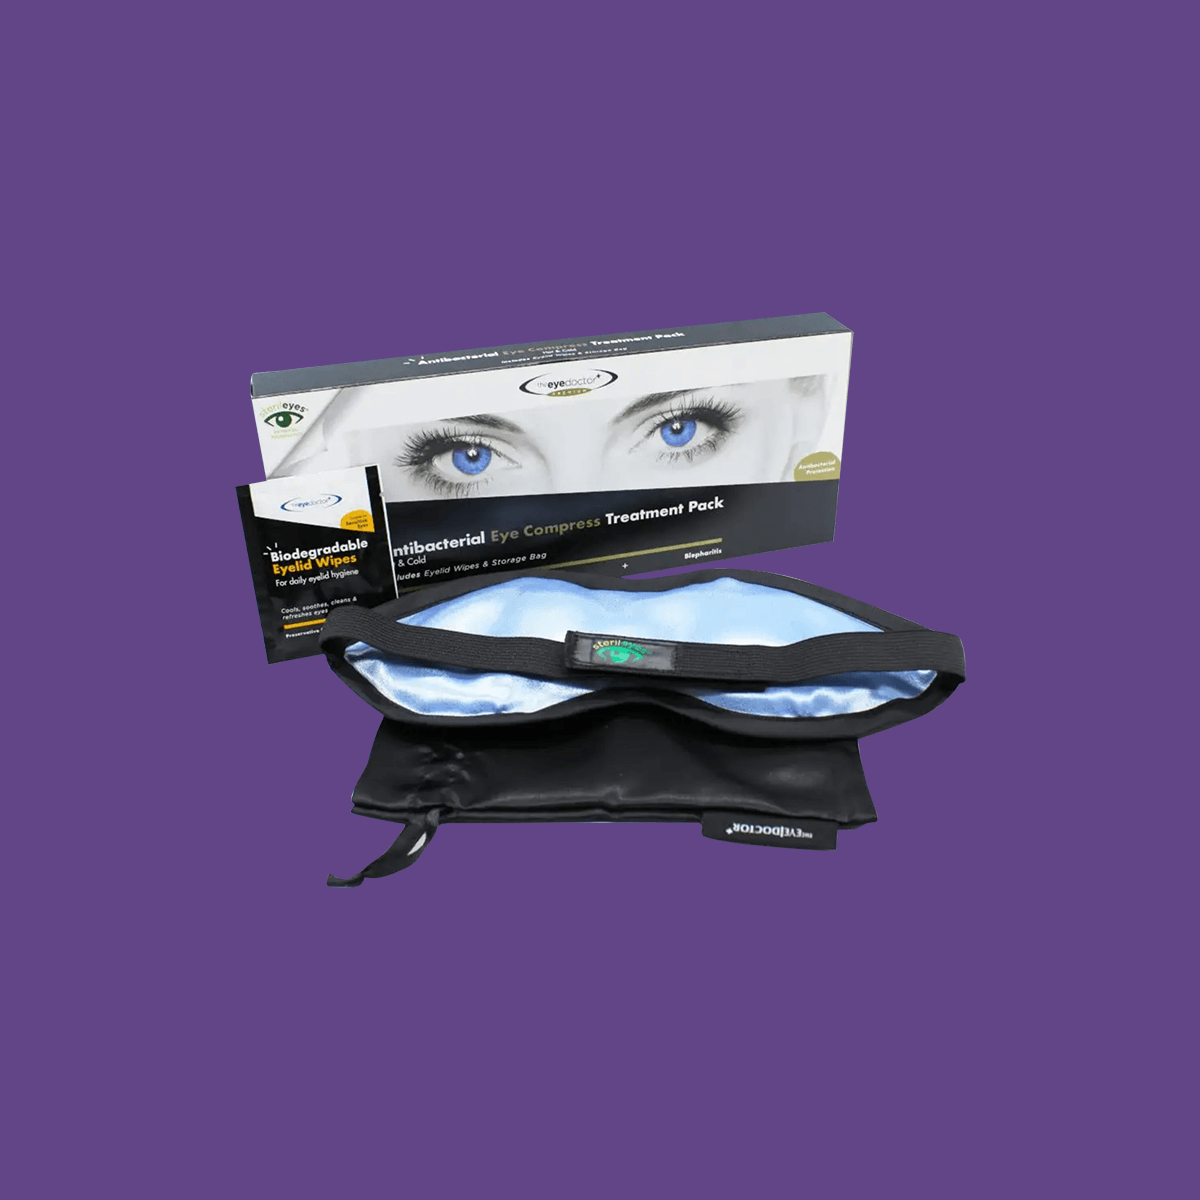 The Eye Doctor Featuring Sterileyes - Antibacterial Hot Eye Compress for Dry Eye, Blepharitis and MGD with a Removable Cover - DryEye Rescue Store